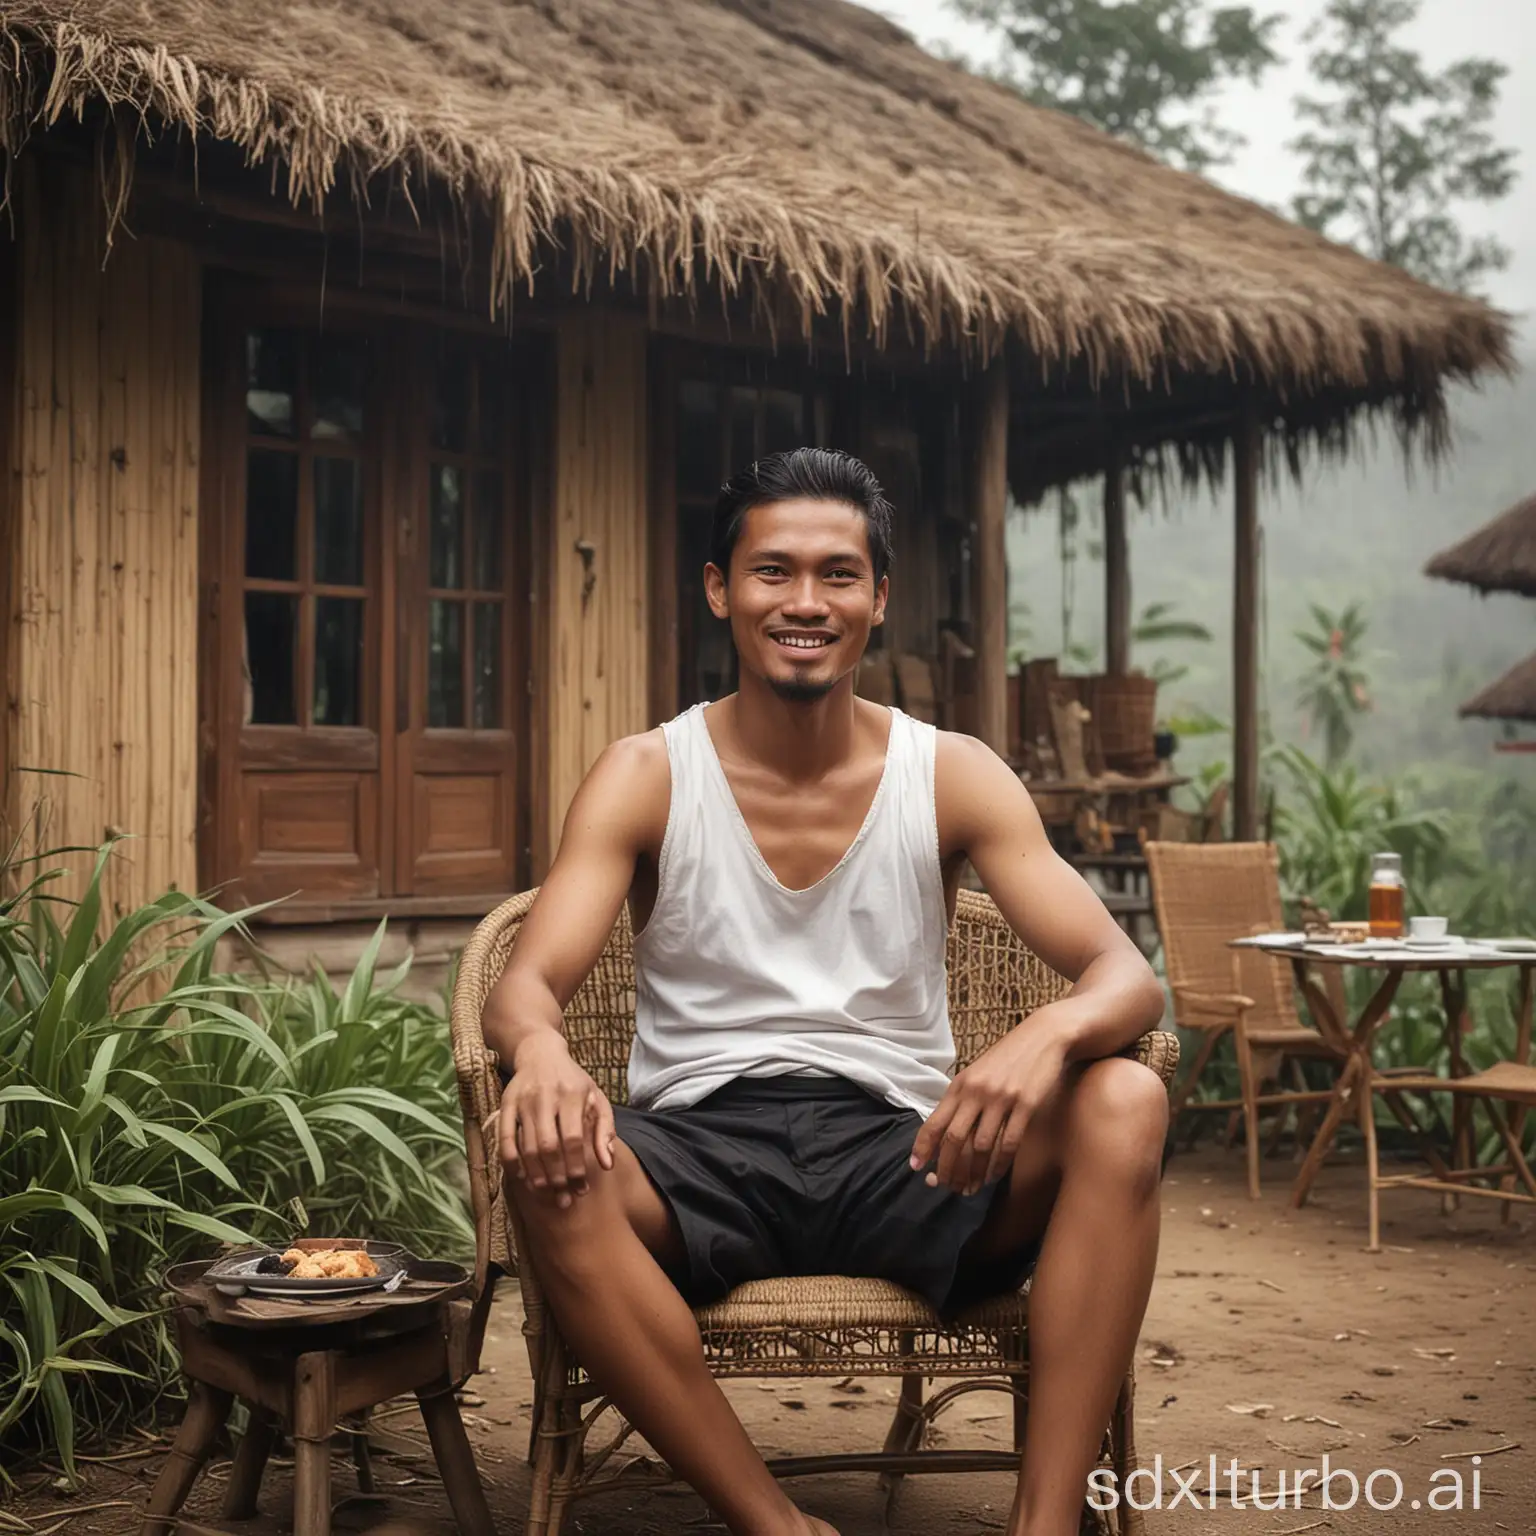 Smiling-Indonesian-Man-in-Traditional-Attire-Enjoying-Fried-Foods-and-Coffee-in-Front-of-Wooden-House